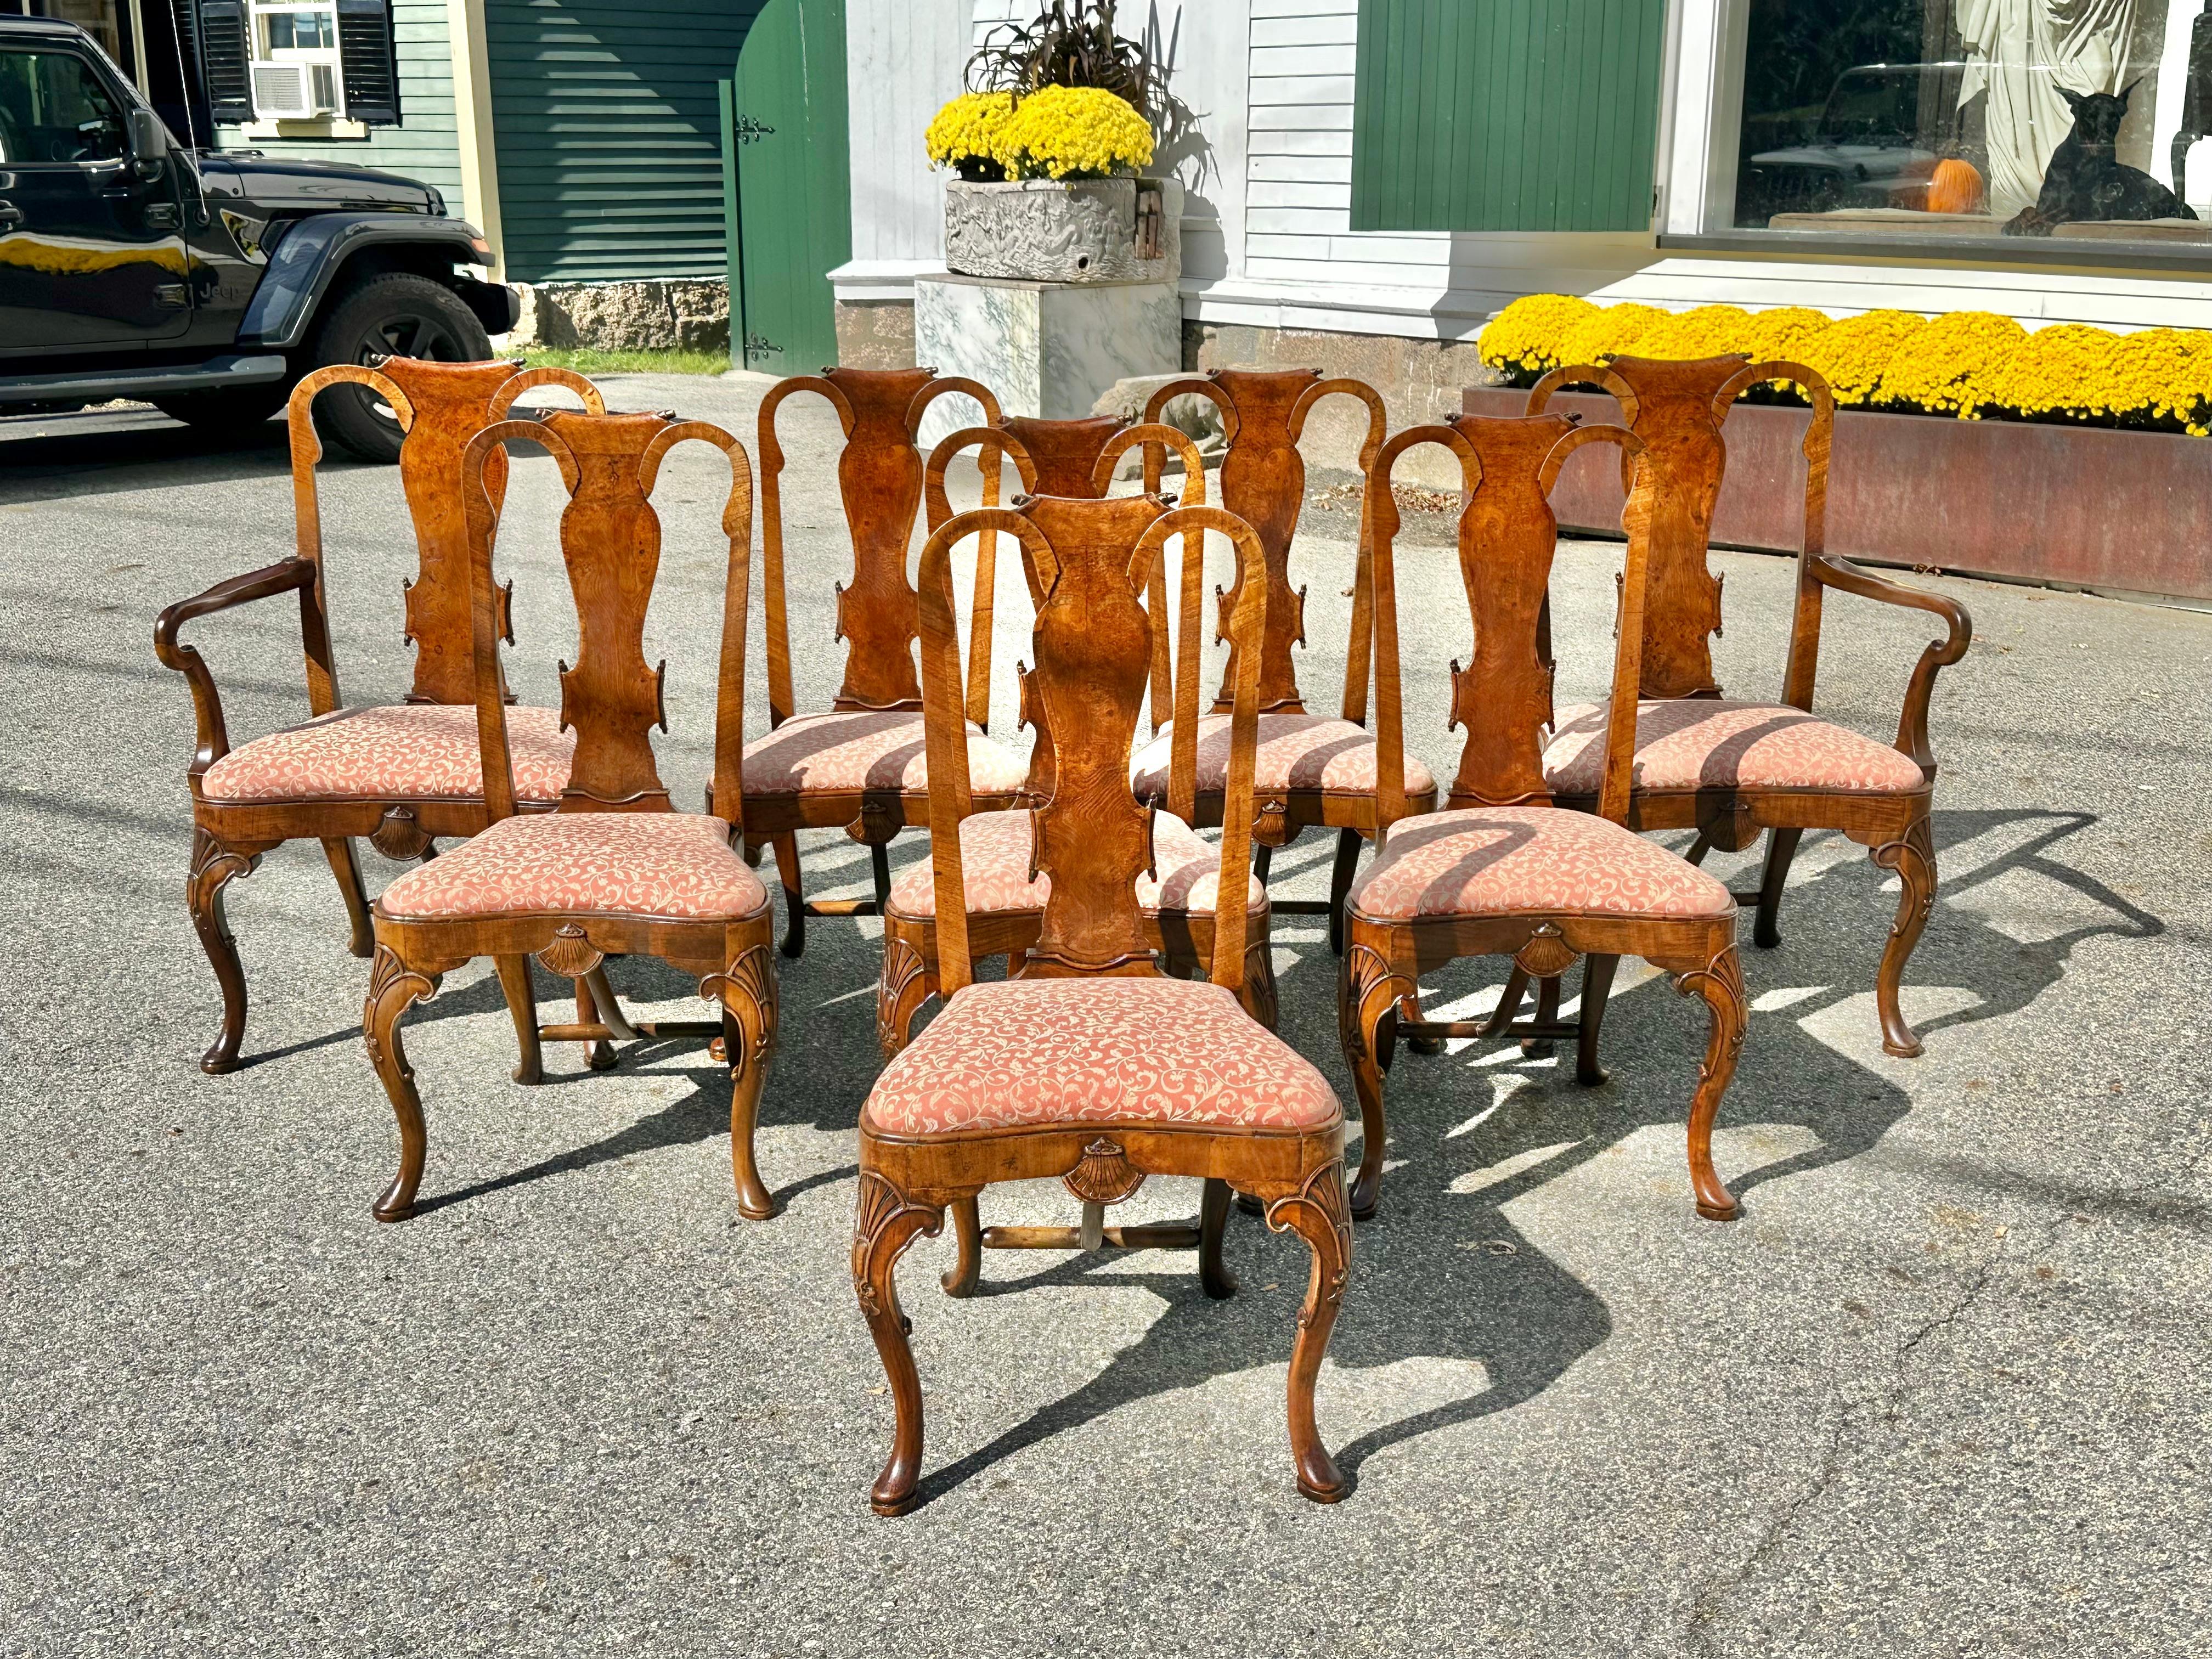 Fine Set of Eight English Walnut and Burl Walnut Queen Anne Dining Chairs.  Beautiful mellow patina.  Well-shaped backs and beautifully carved legs with period detailed stretchers.  Carved shell on knee.  Scrolled top crest. Slip seats.  